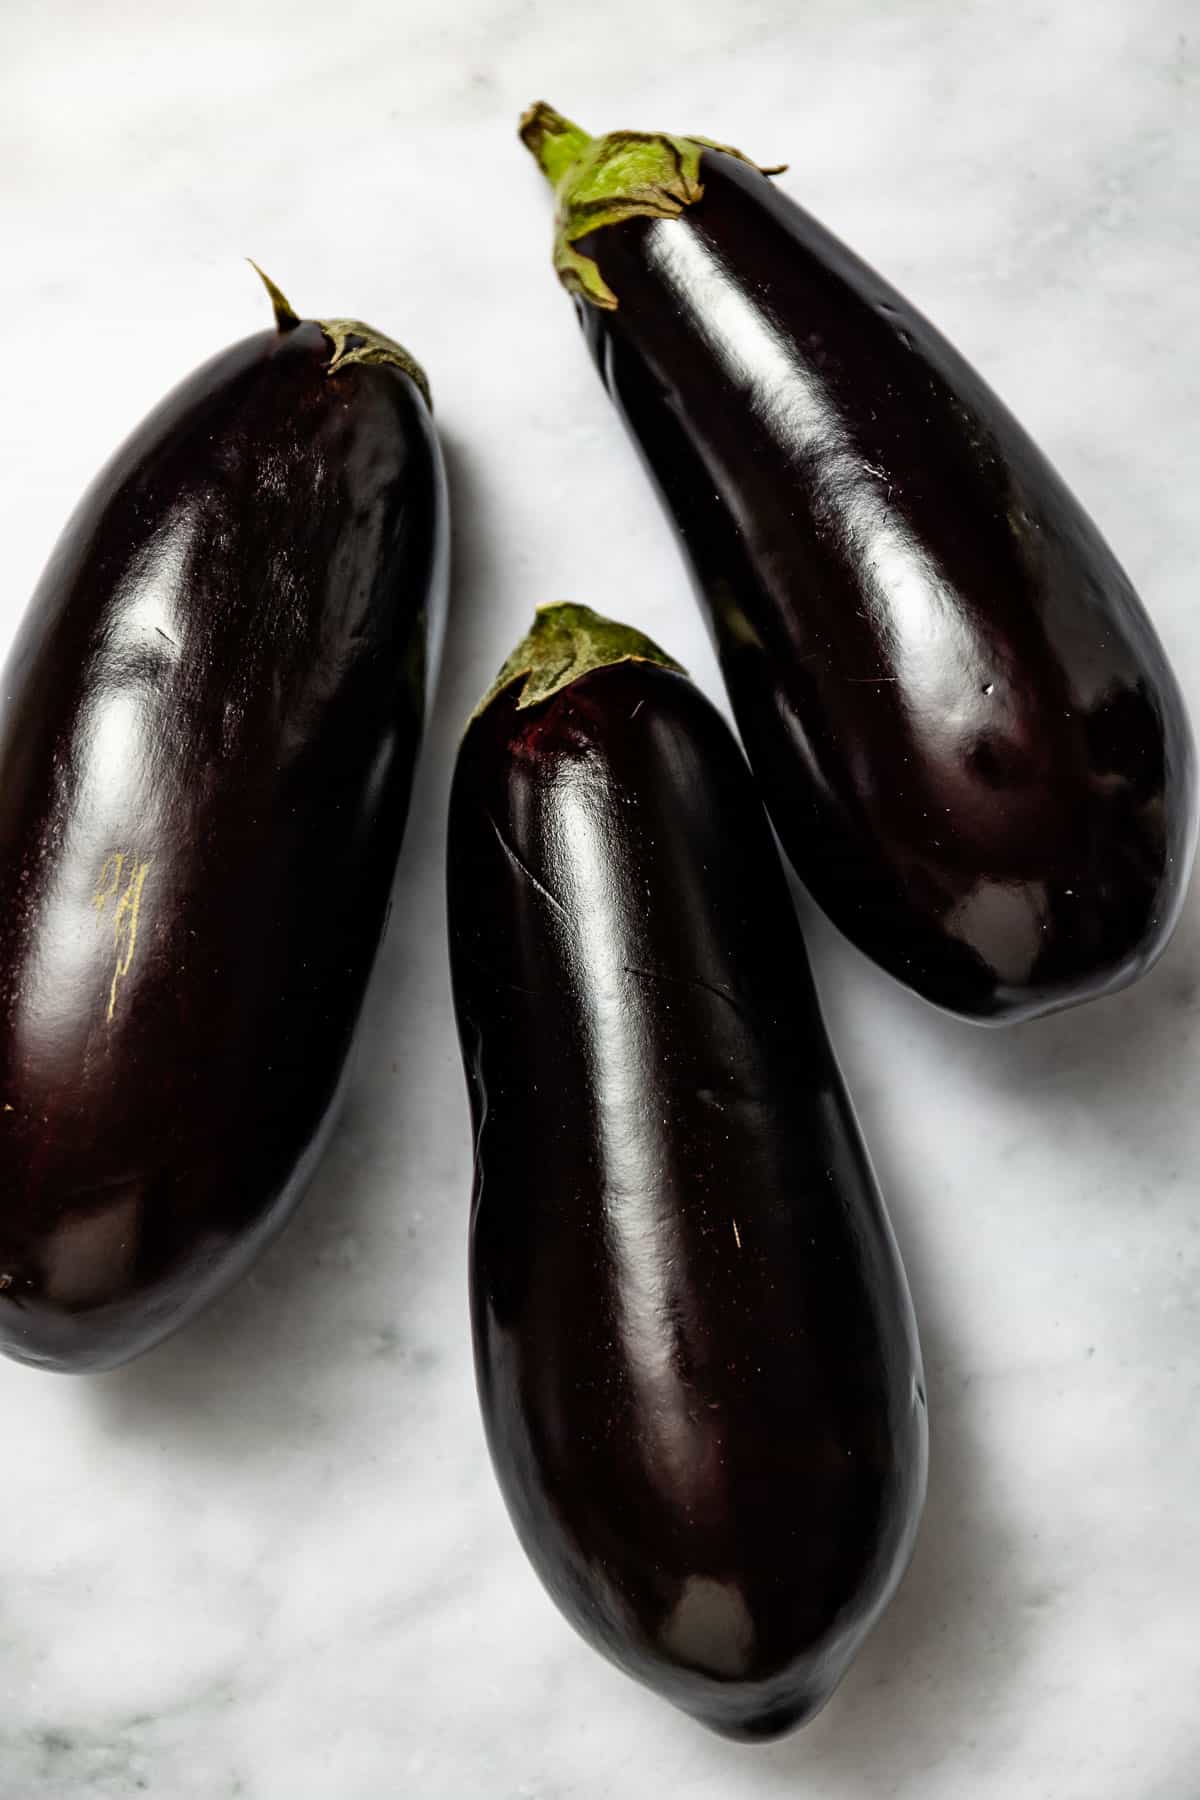 Two globe eggplants next to each other on a white backdrop.